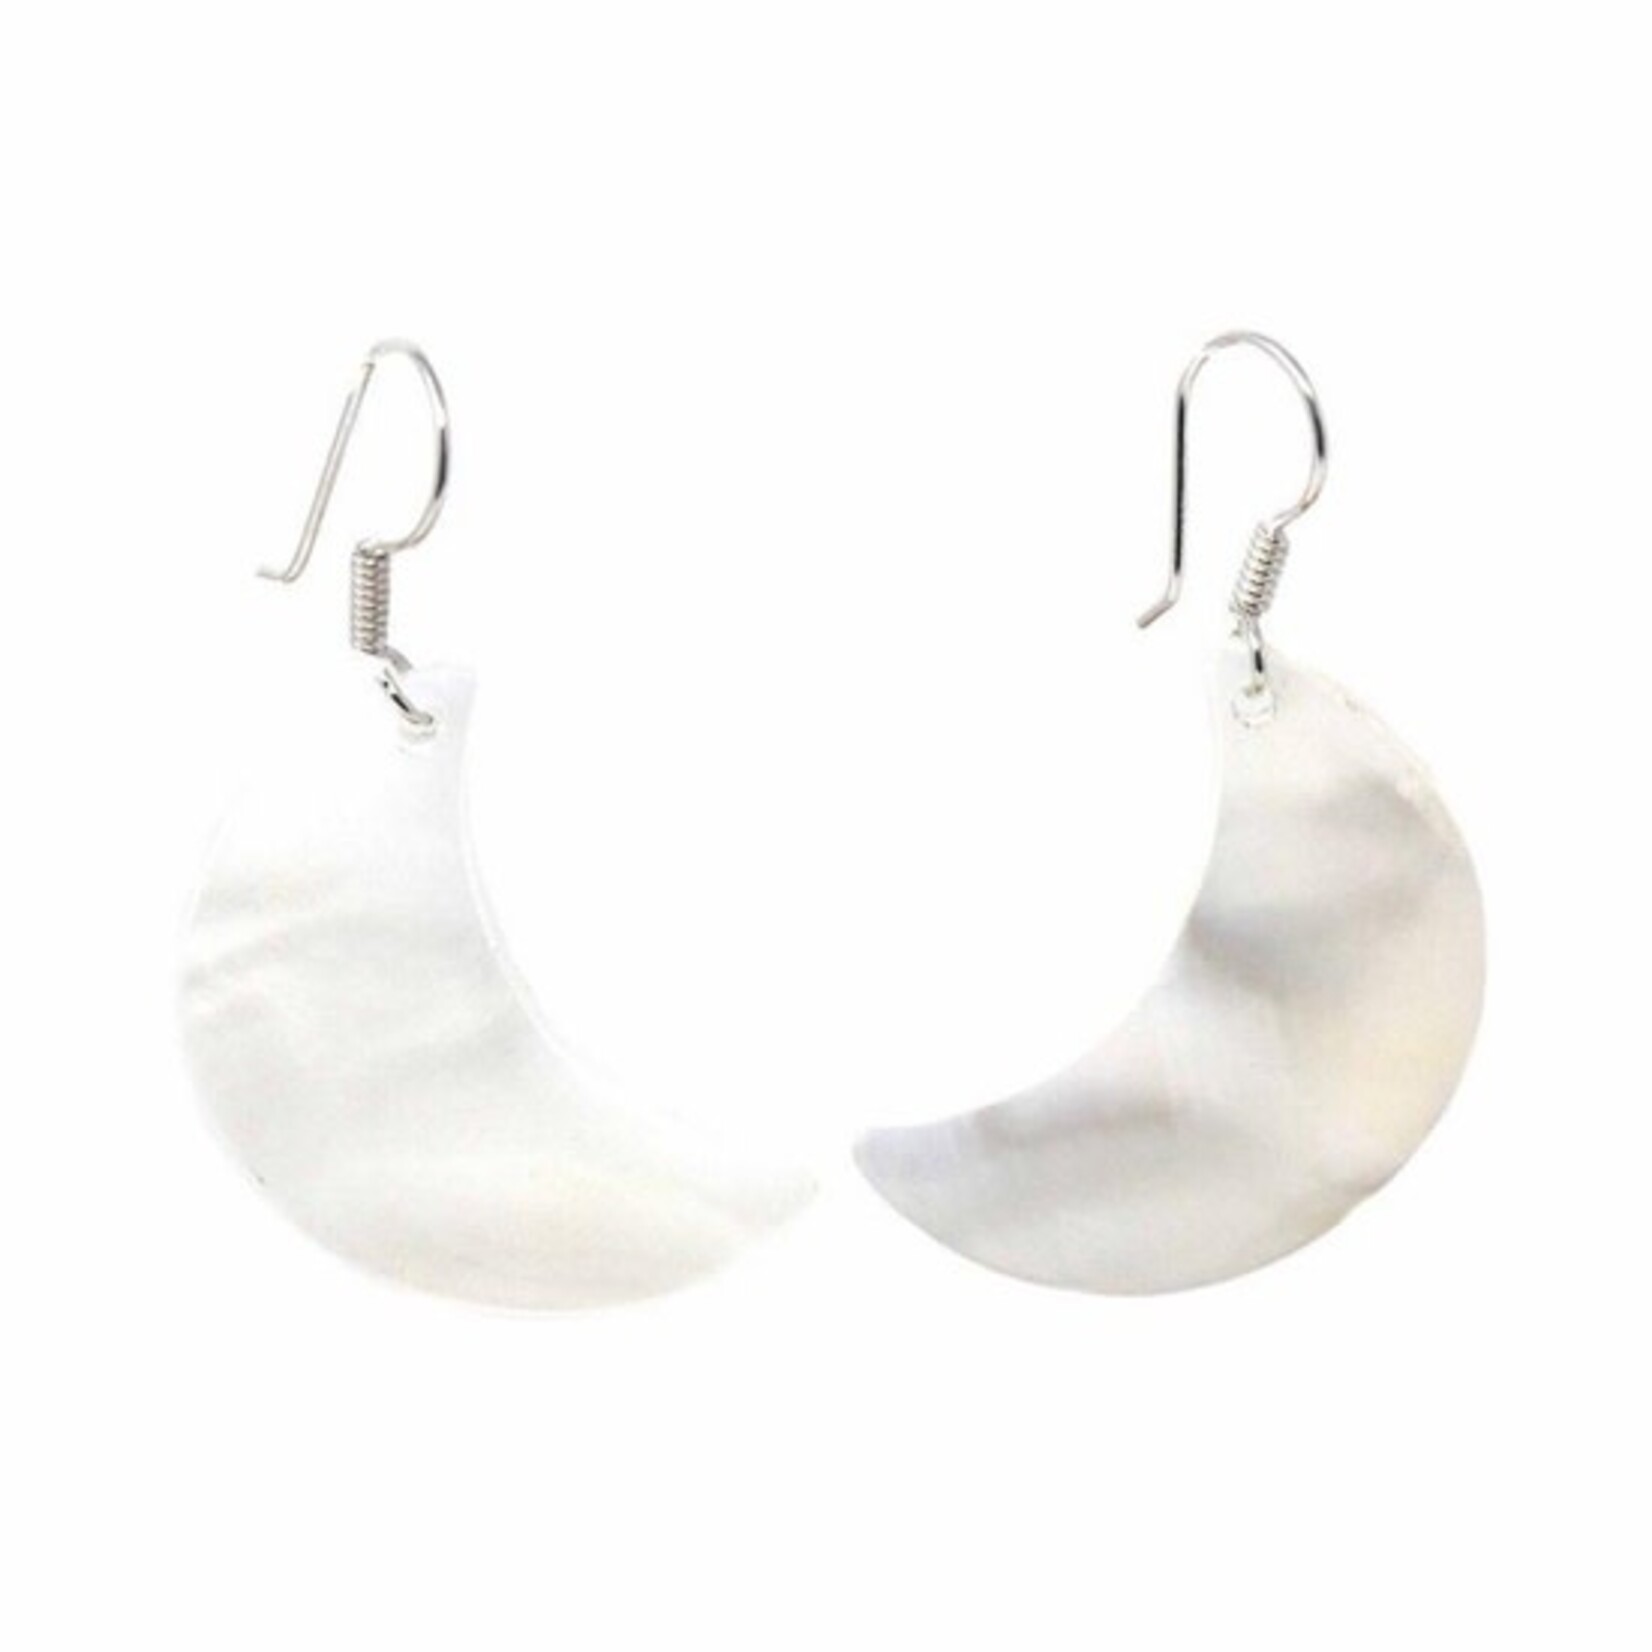 Global Crafts Mother of Pearl Crescent Moon Earrings, Mexico